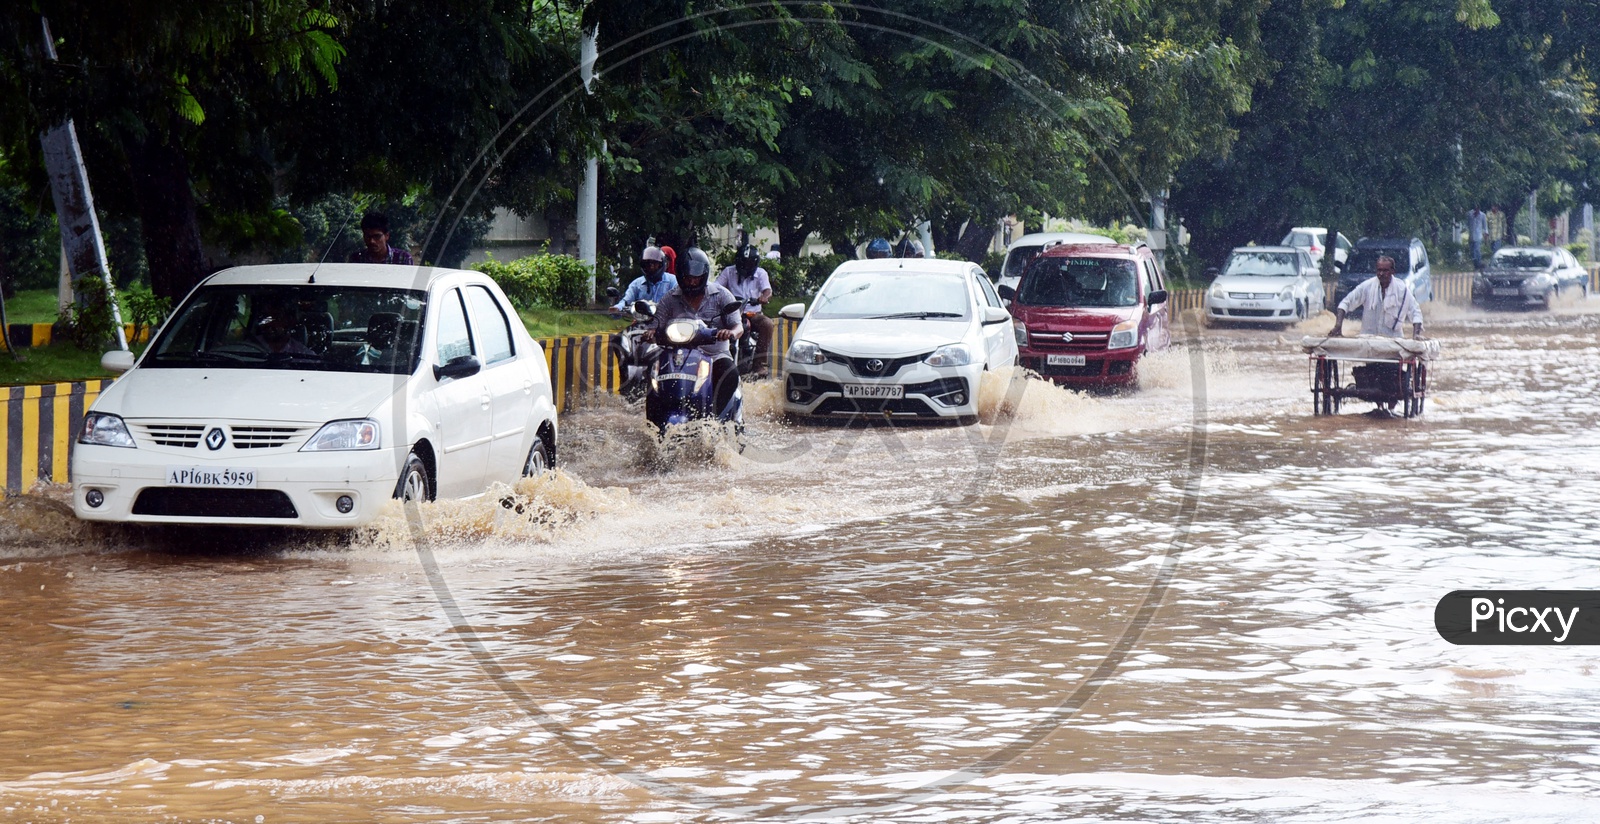 Traffic in the flooded road